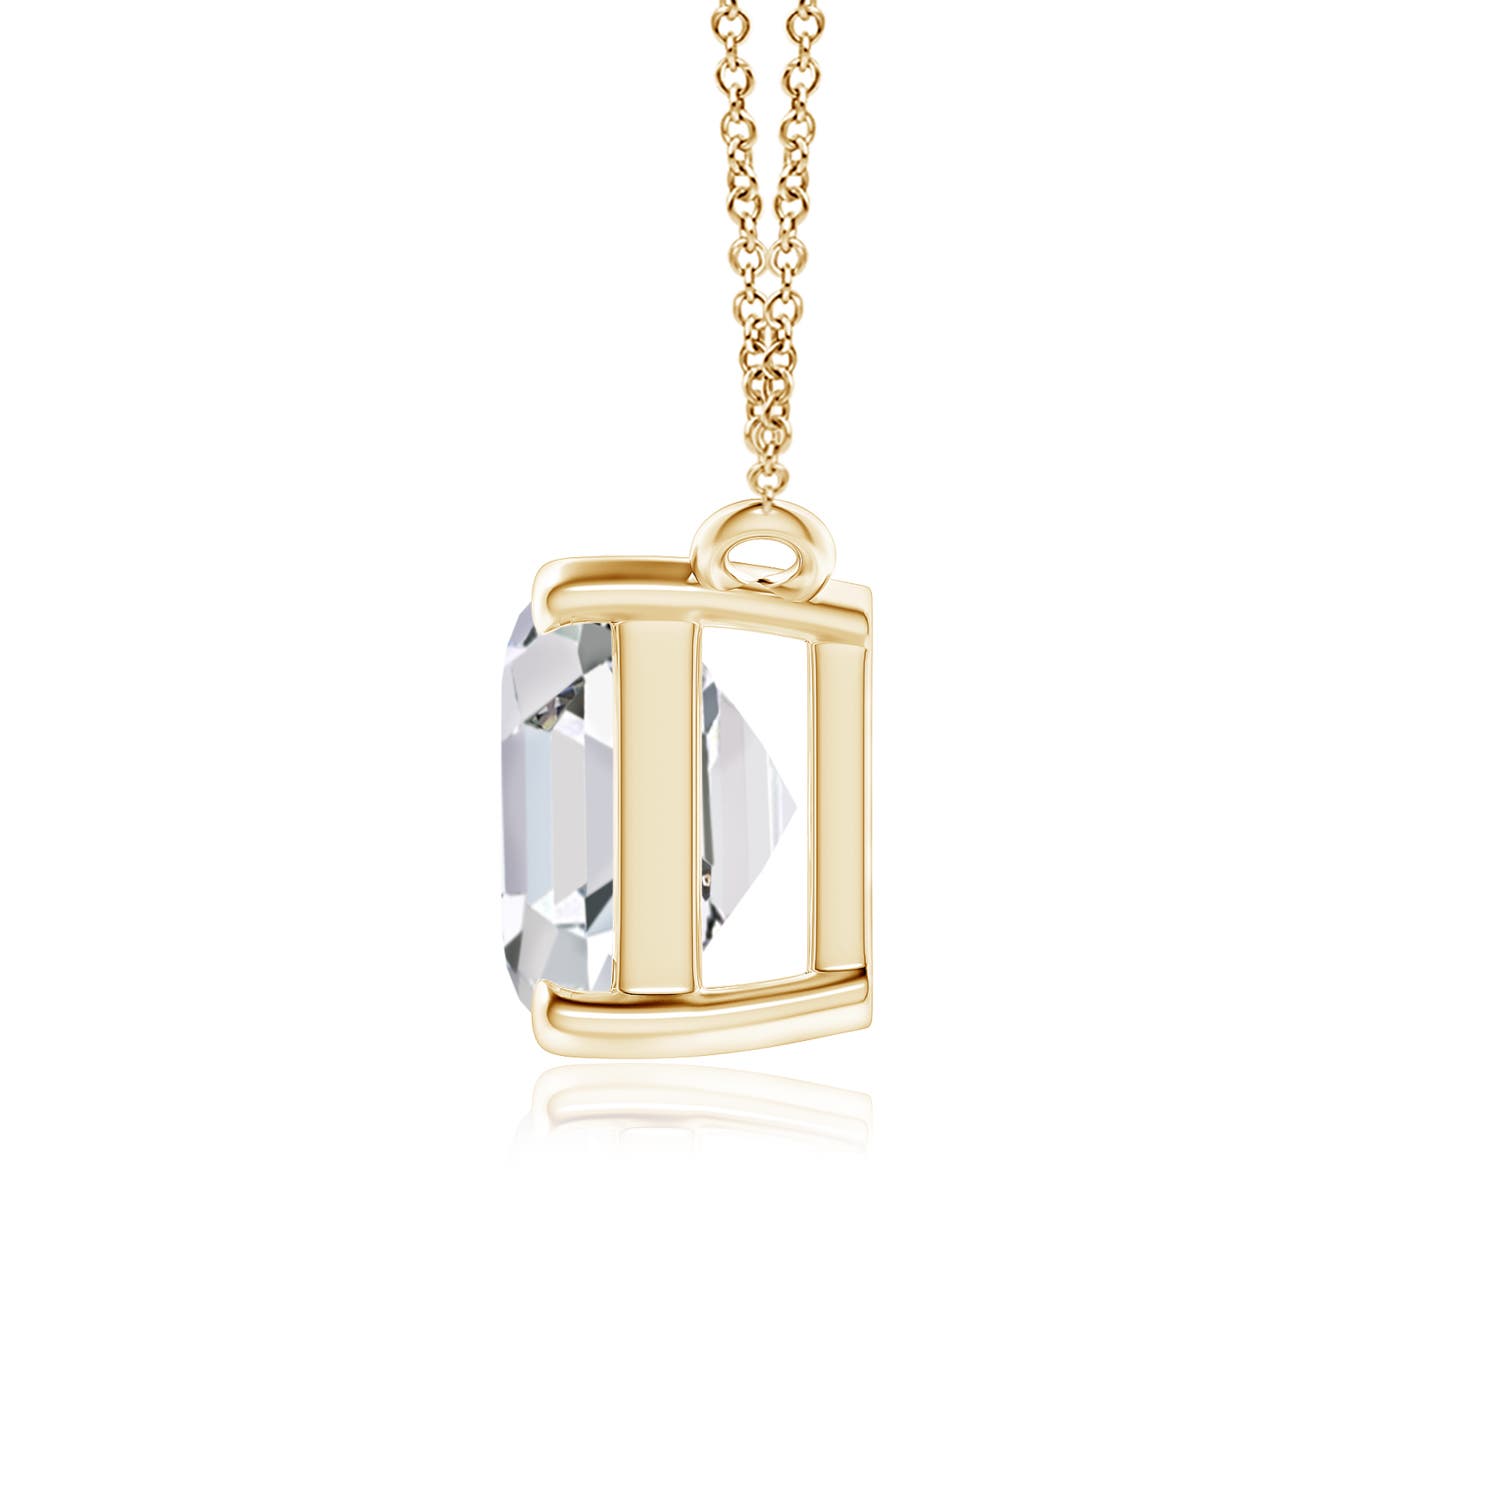 H, SI2 / 3 CT / 18 KT Yellow Gold